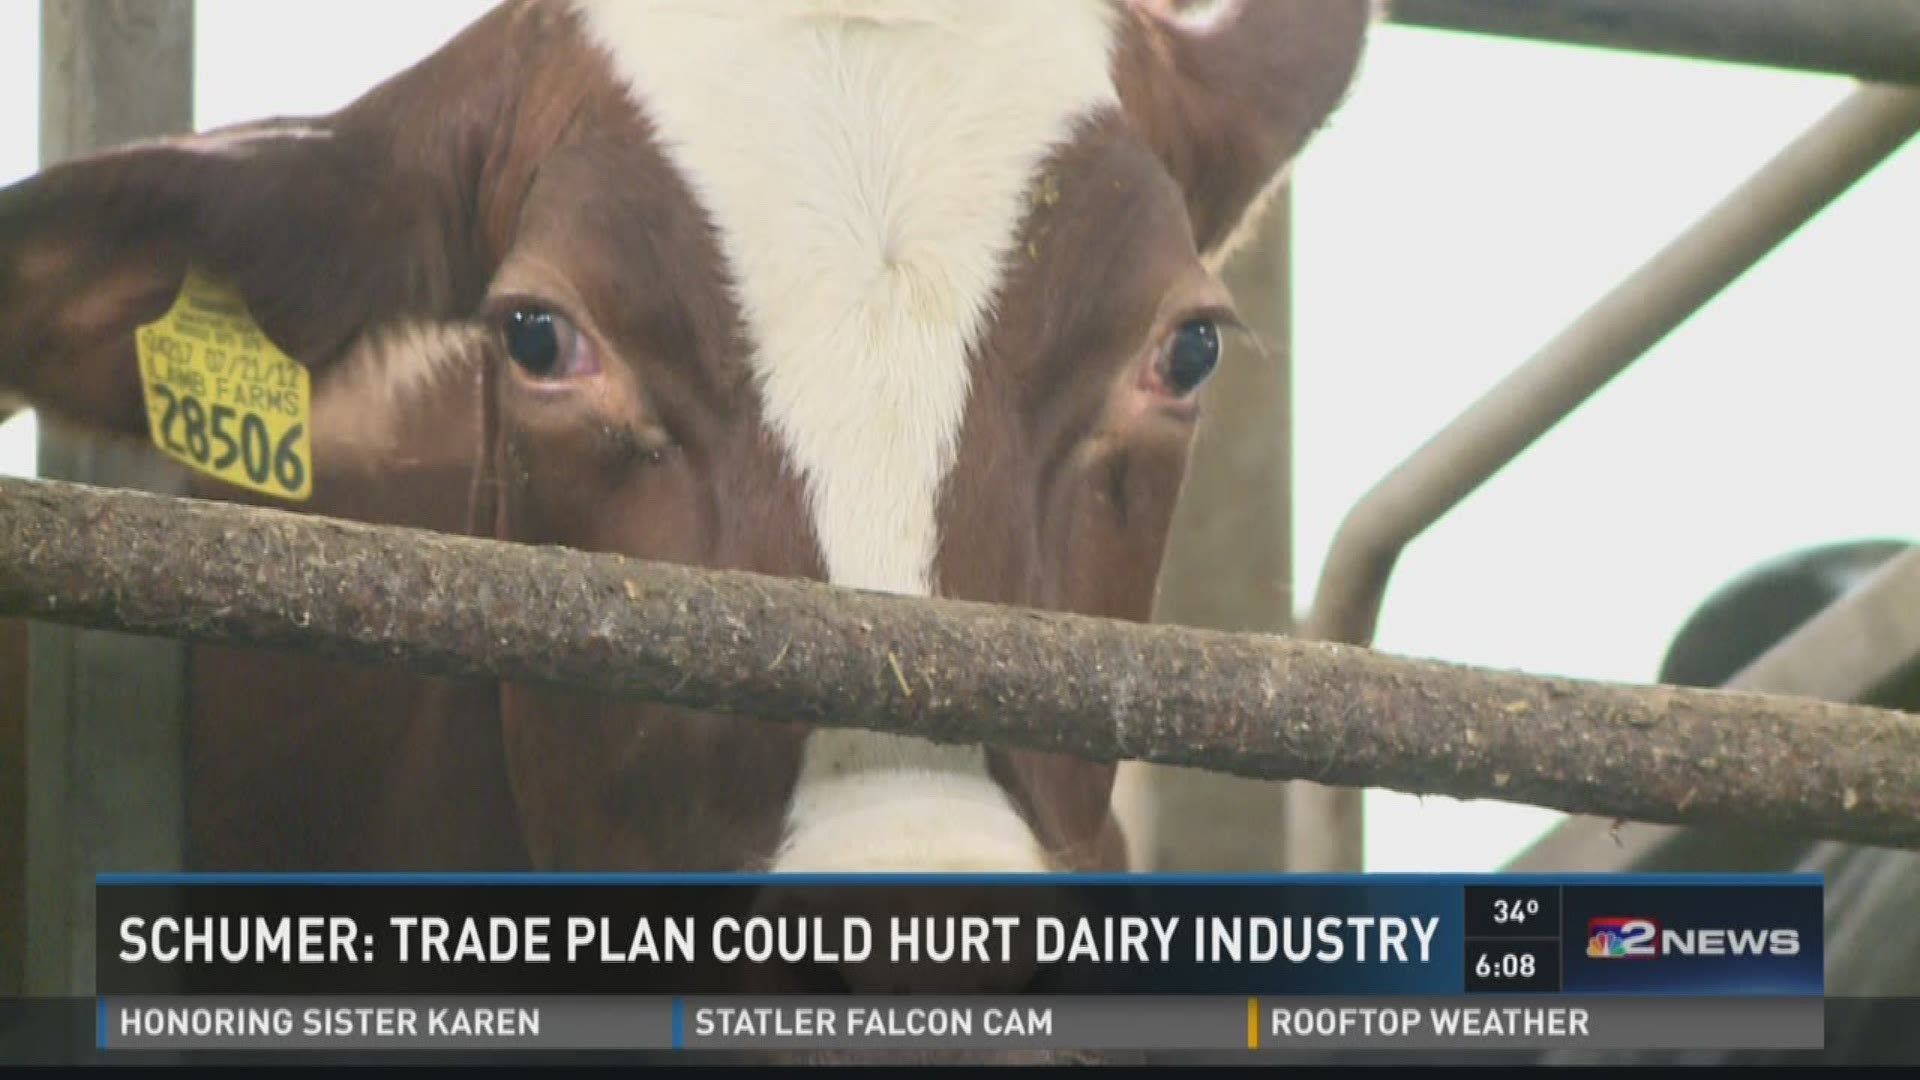 Schumer: Trade Plan Could Hurt Dairy Industry